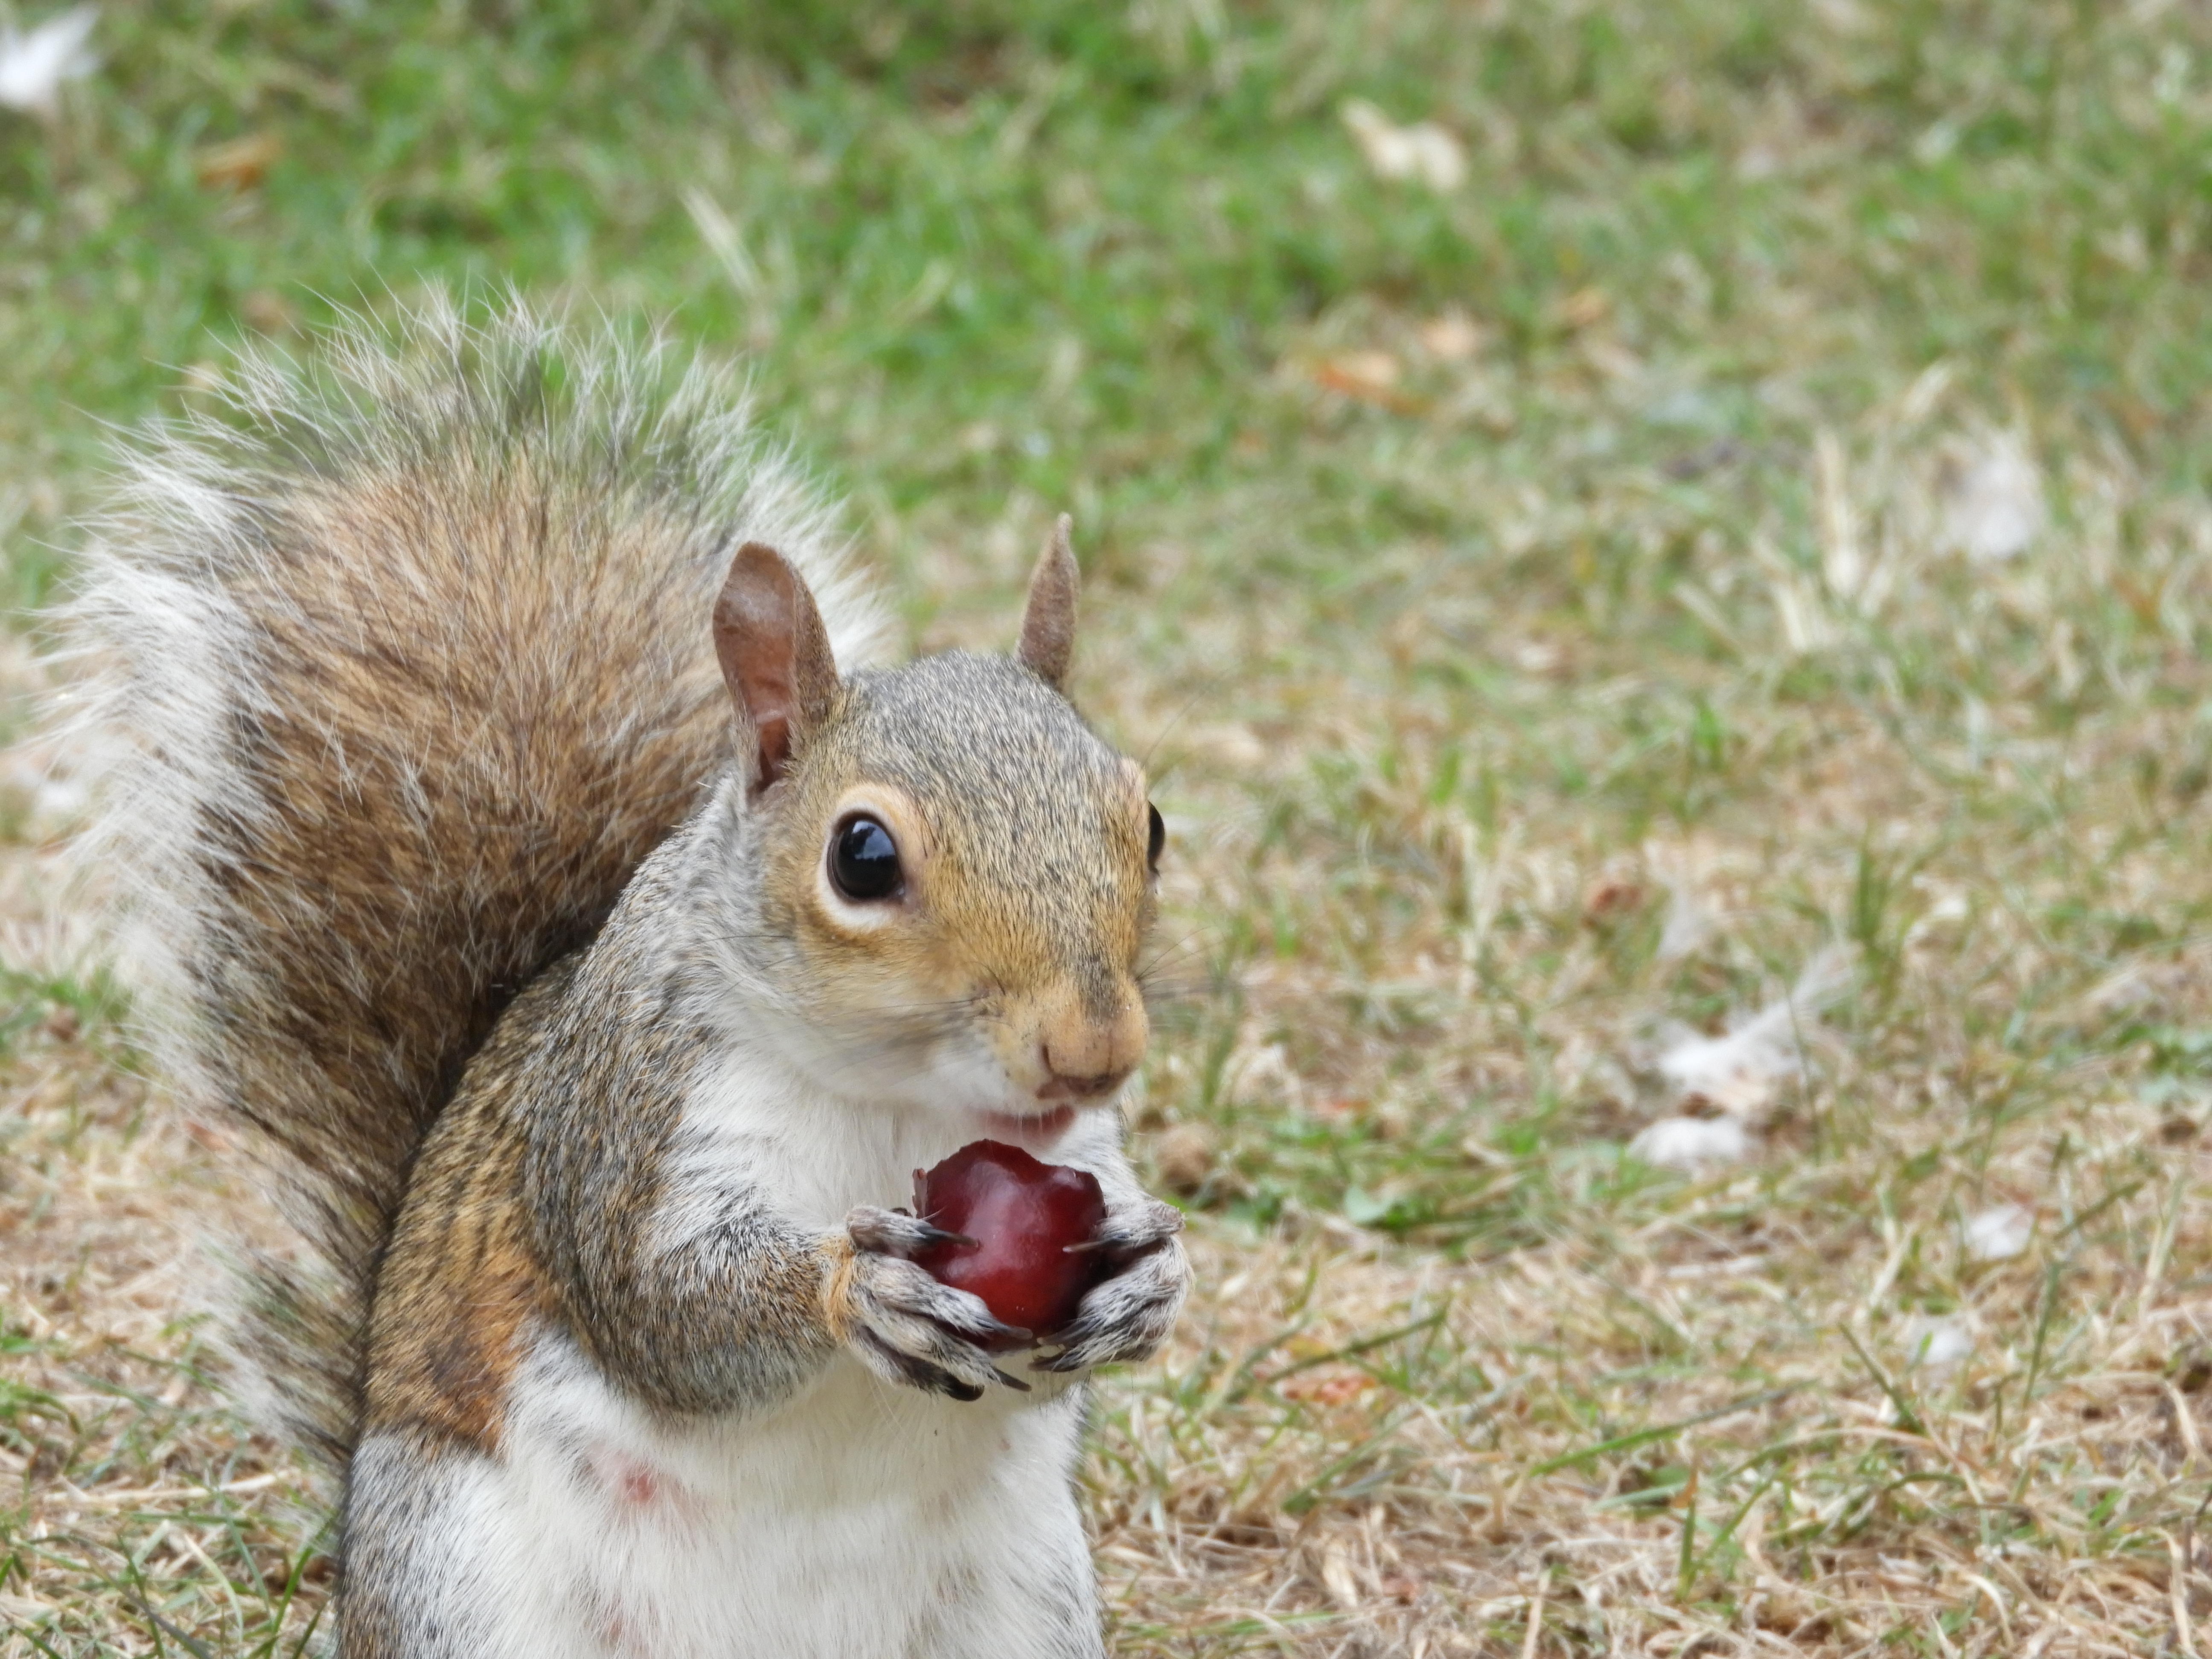 A grey squirrel holding a red fruit in its hands standing on the grass